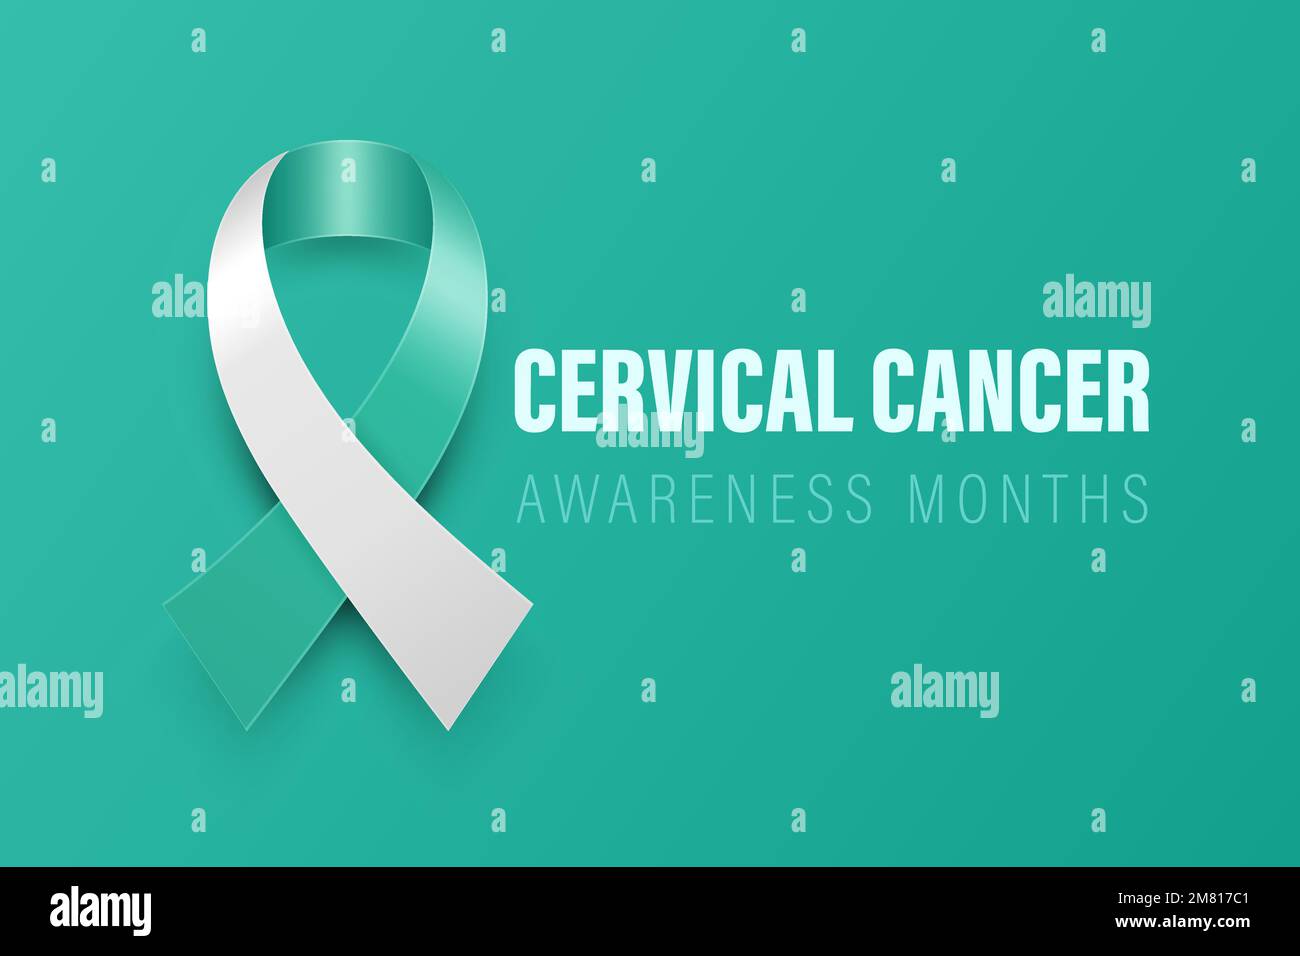 Cervical Cancer Banner Card Placard With Vector 3d Realistic Teal And White Ribbon On Teal